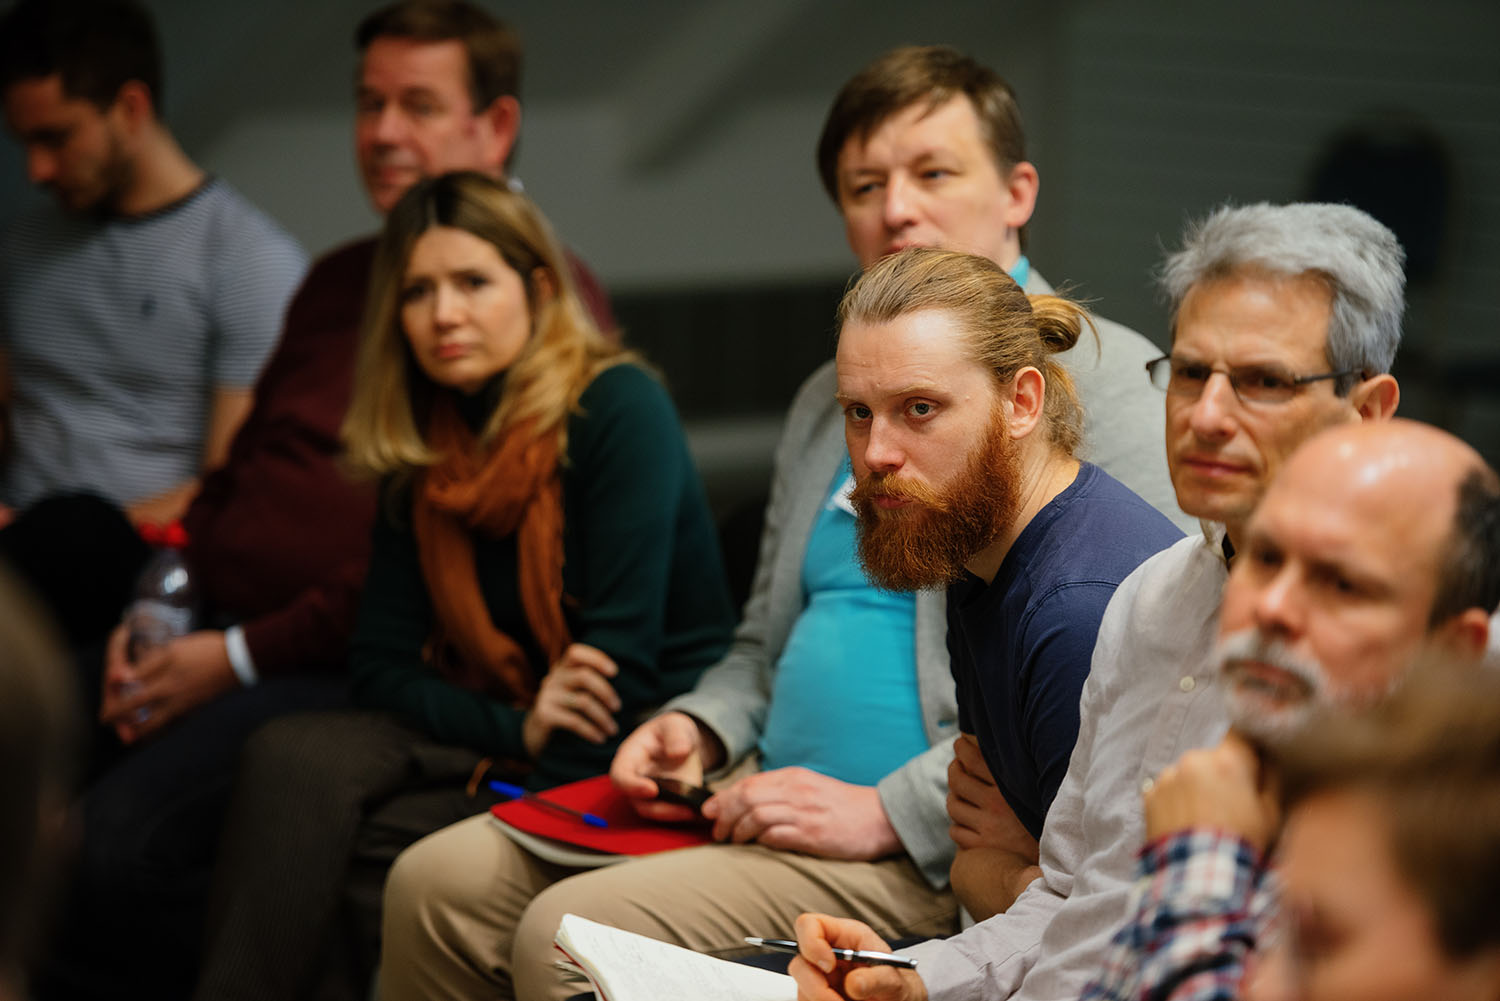 New learnings through each of the 7 modules of the program. In the close-up image, a bearded young man and other participants is sitting in the event room and listening intently to the speaker.